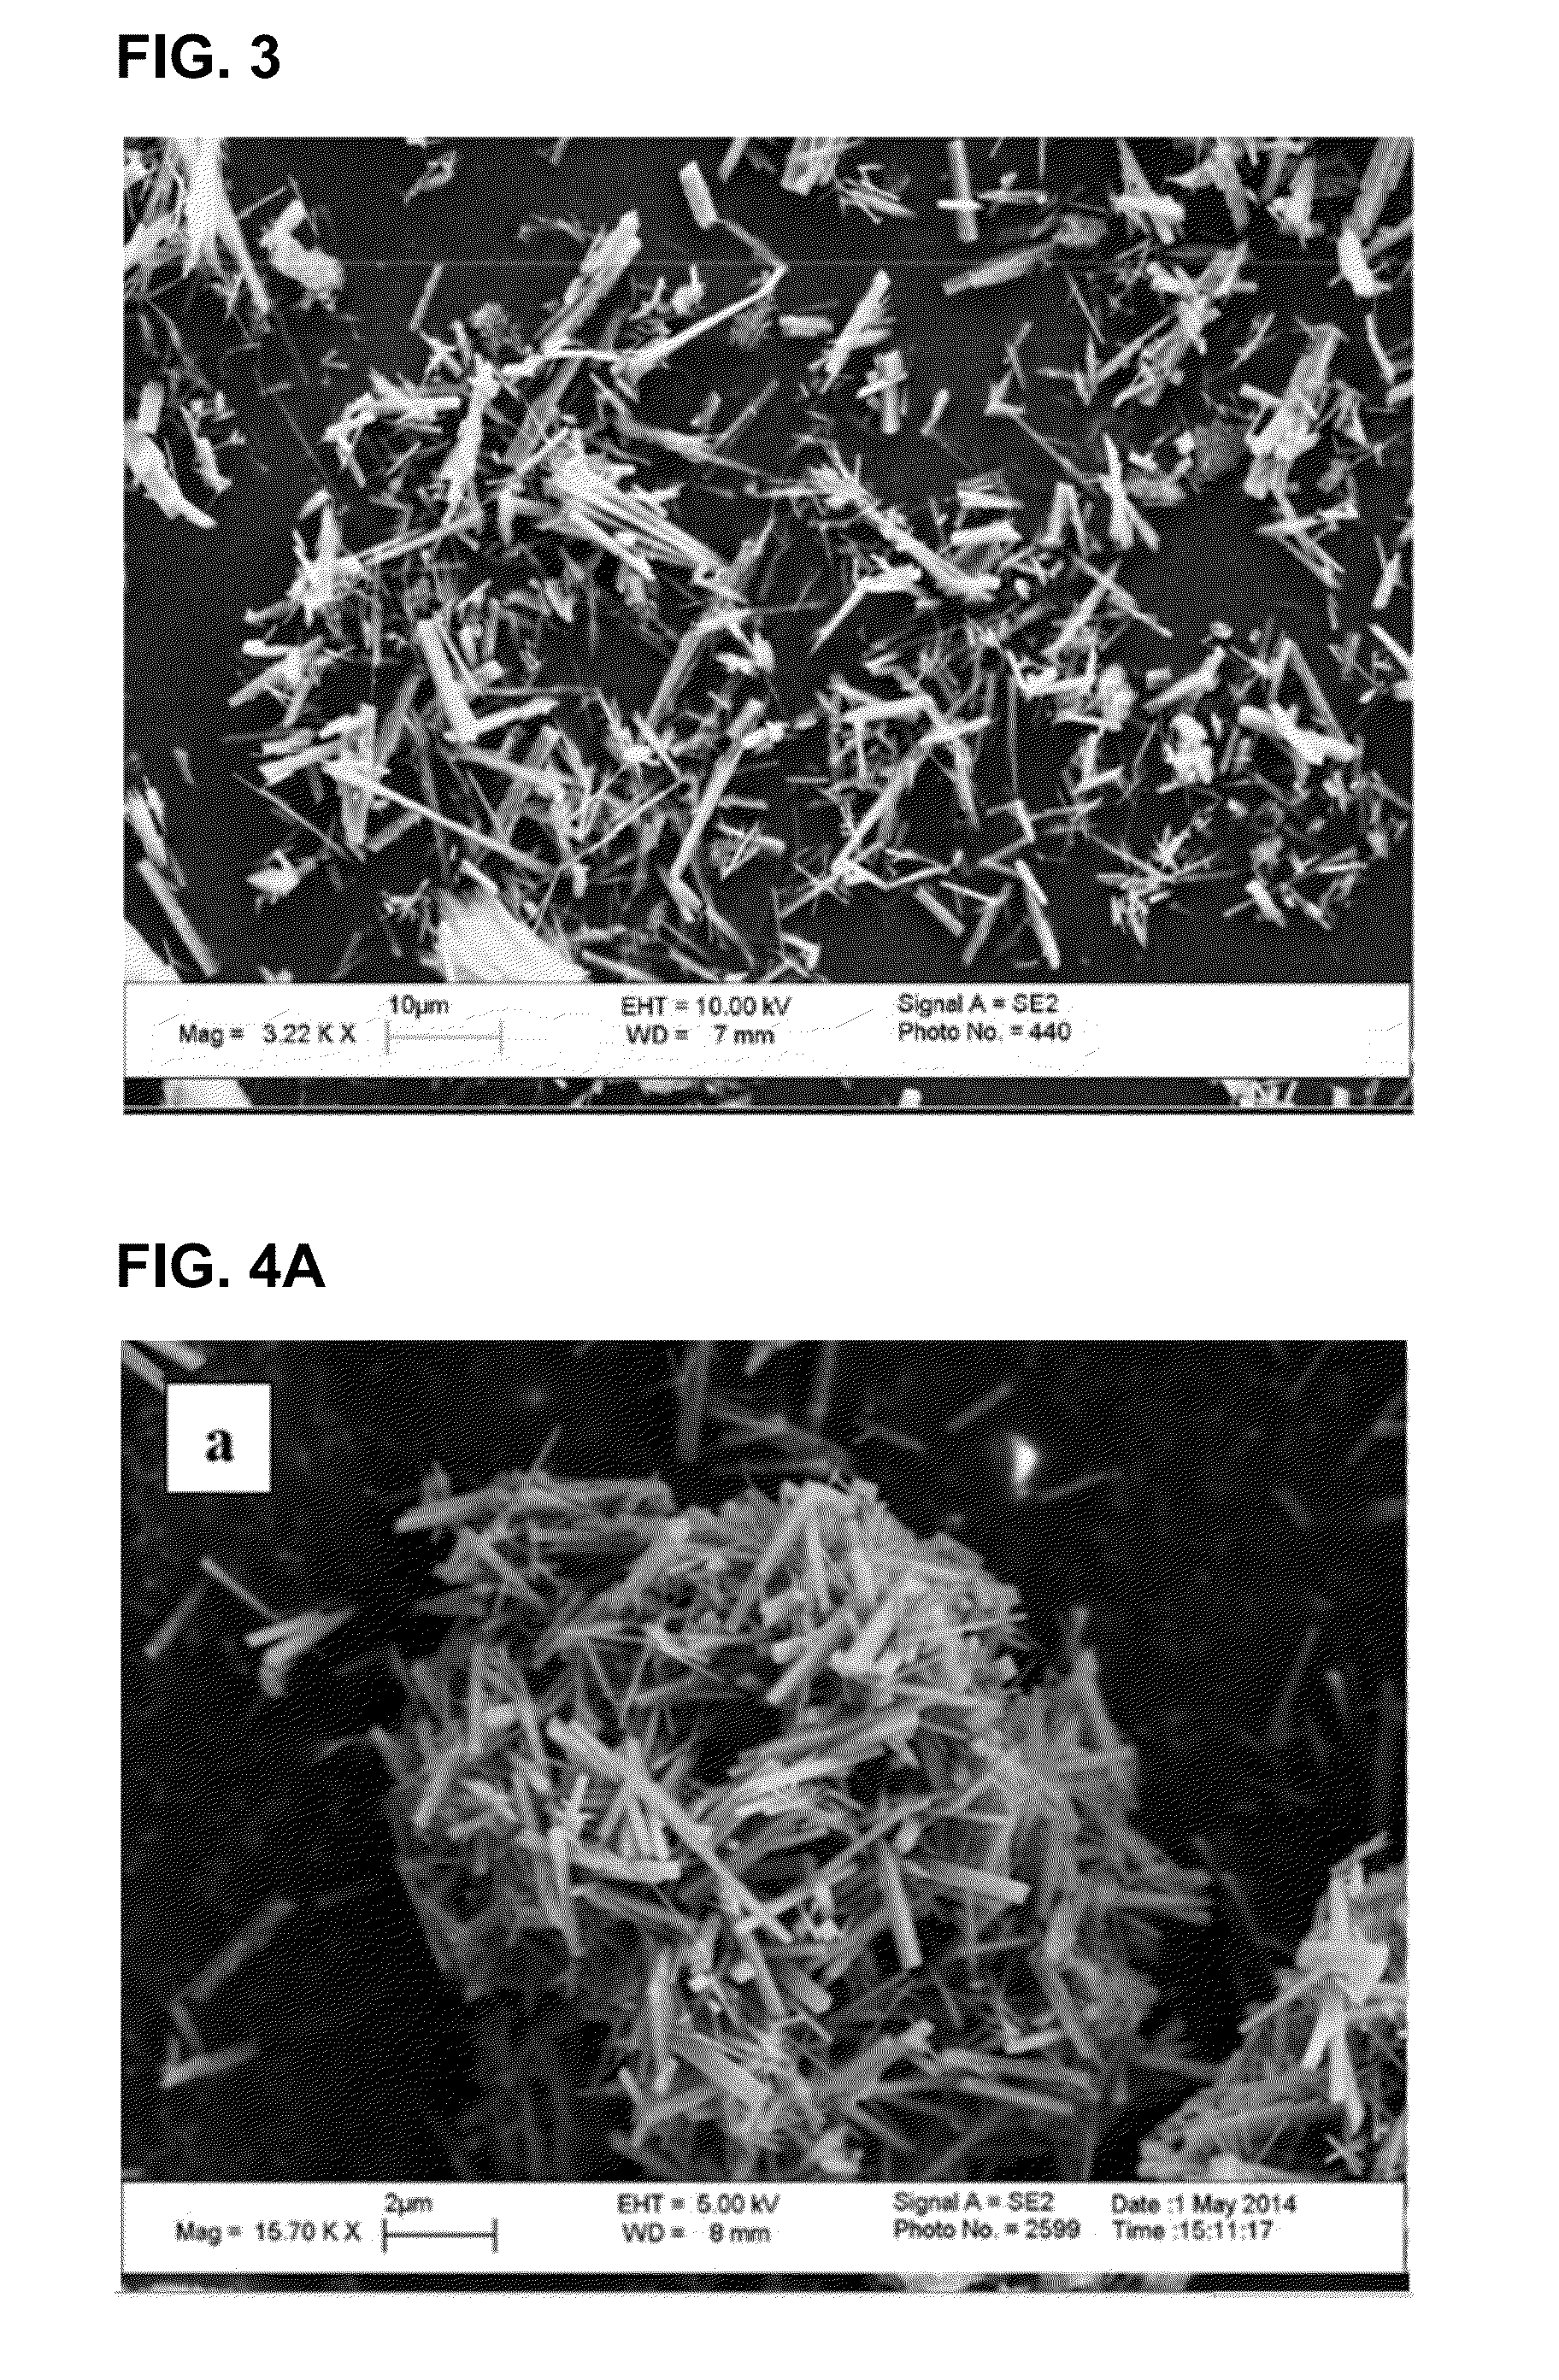 Novel methods for producing crystalline microporous solids with the heu topology and compositions derived from the same